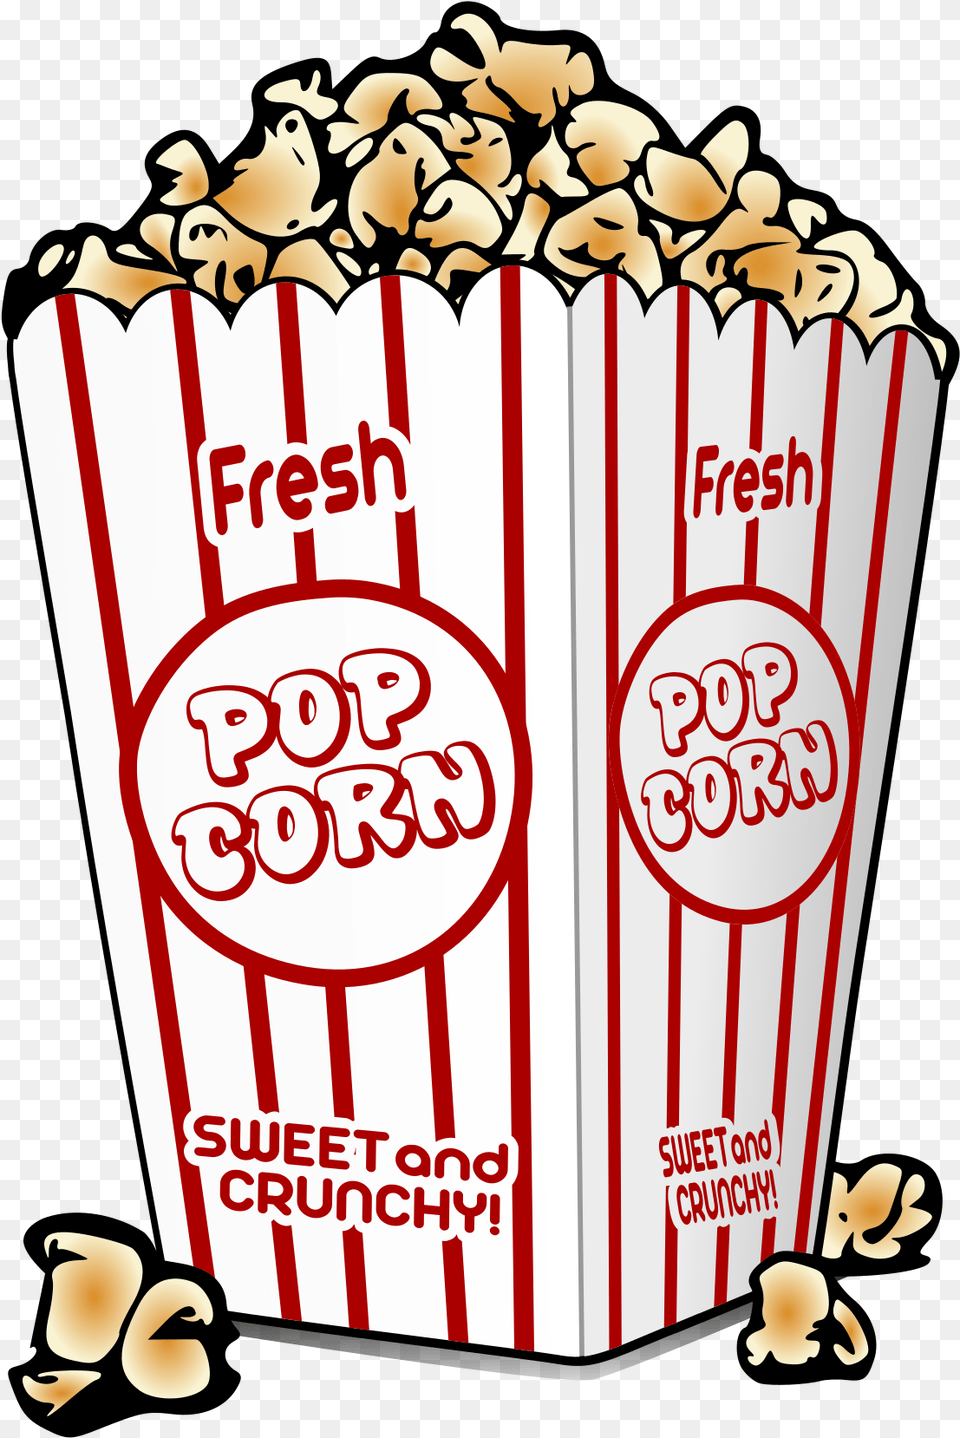 Popcorn Transparent Pictures Movie Theatre Popcorn Cartoon, Food, Snack, Dynamite, Weapon Png Image